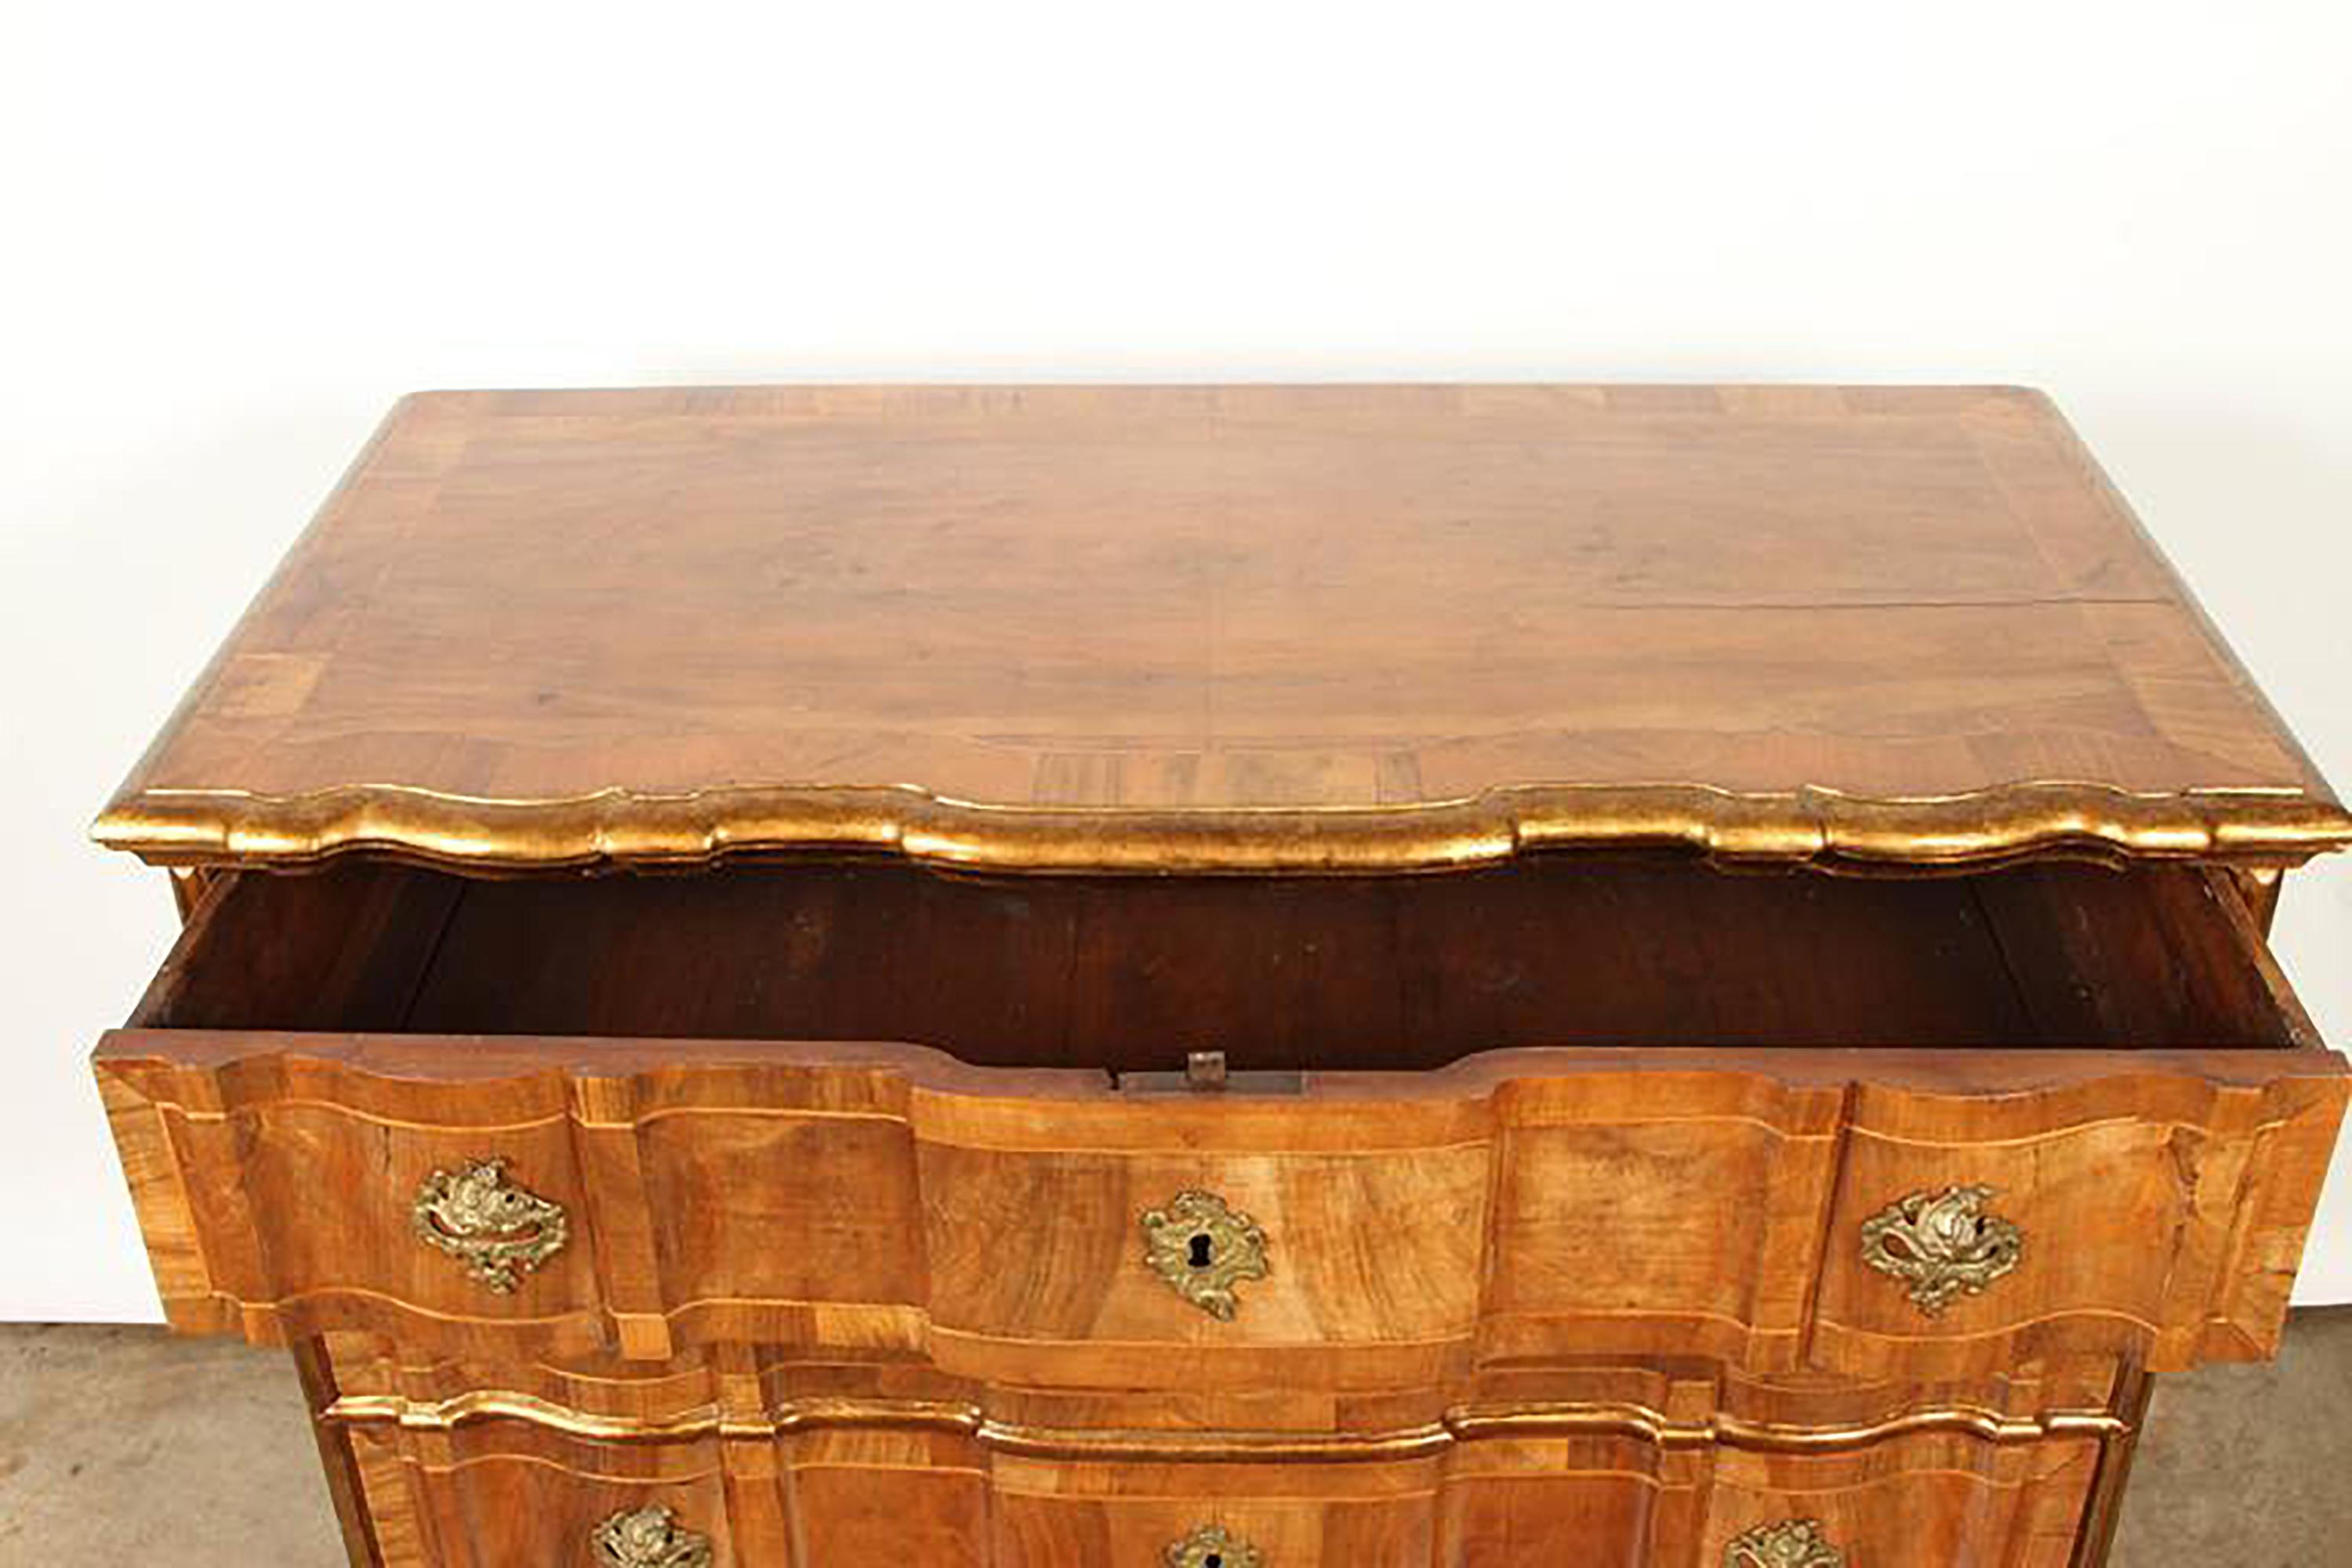 A Danish rococo chest of drawers, consisting of four drawers, with gilt bronze hardware and gilt borders. This Danish chest is veneered in walnut and has banding on each drawer.